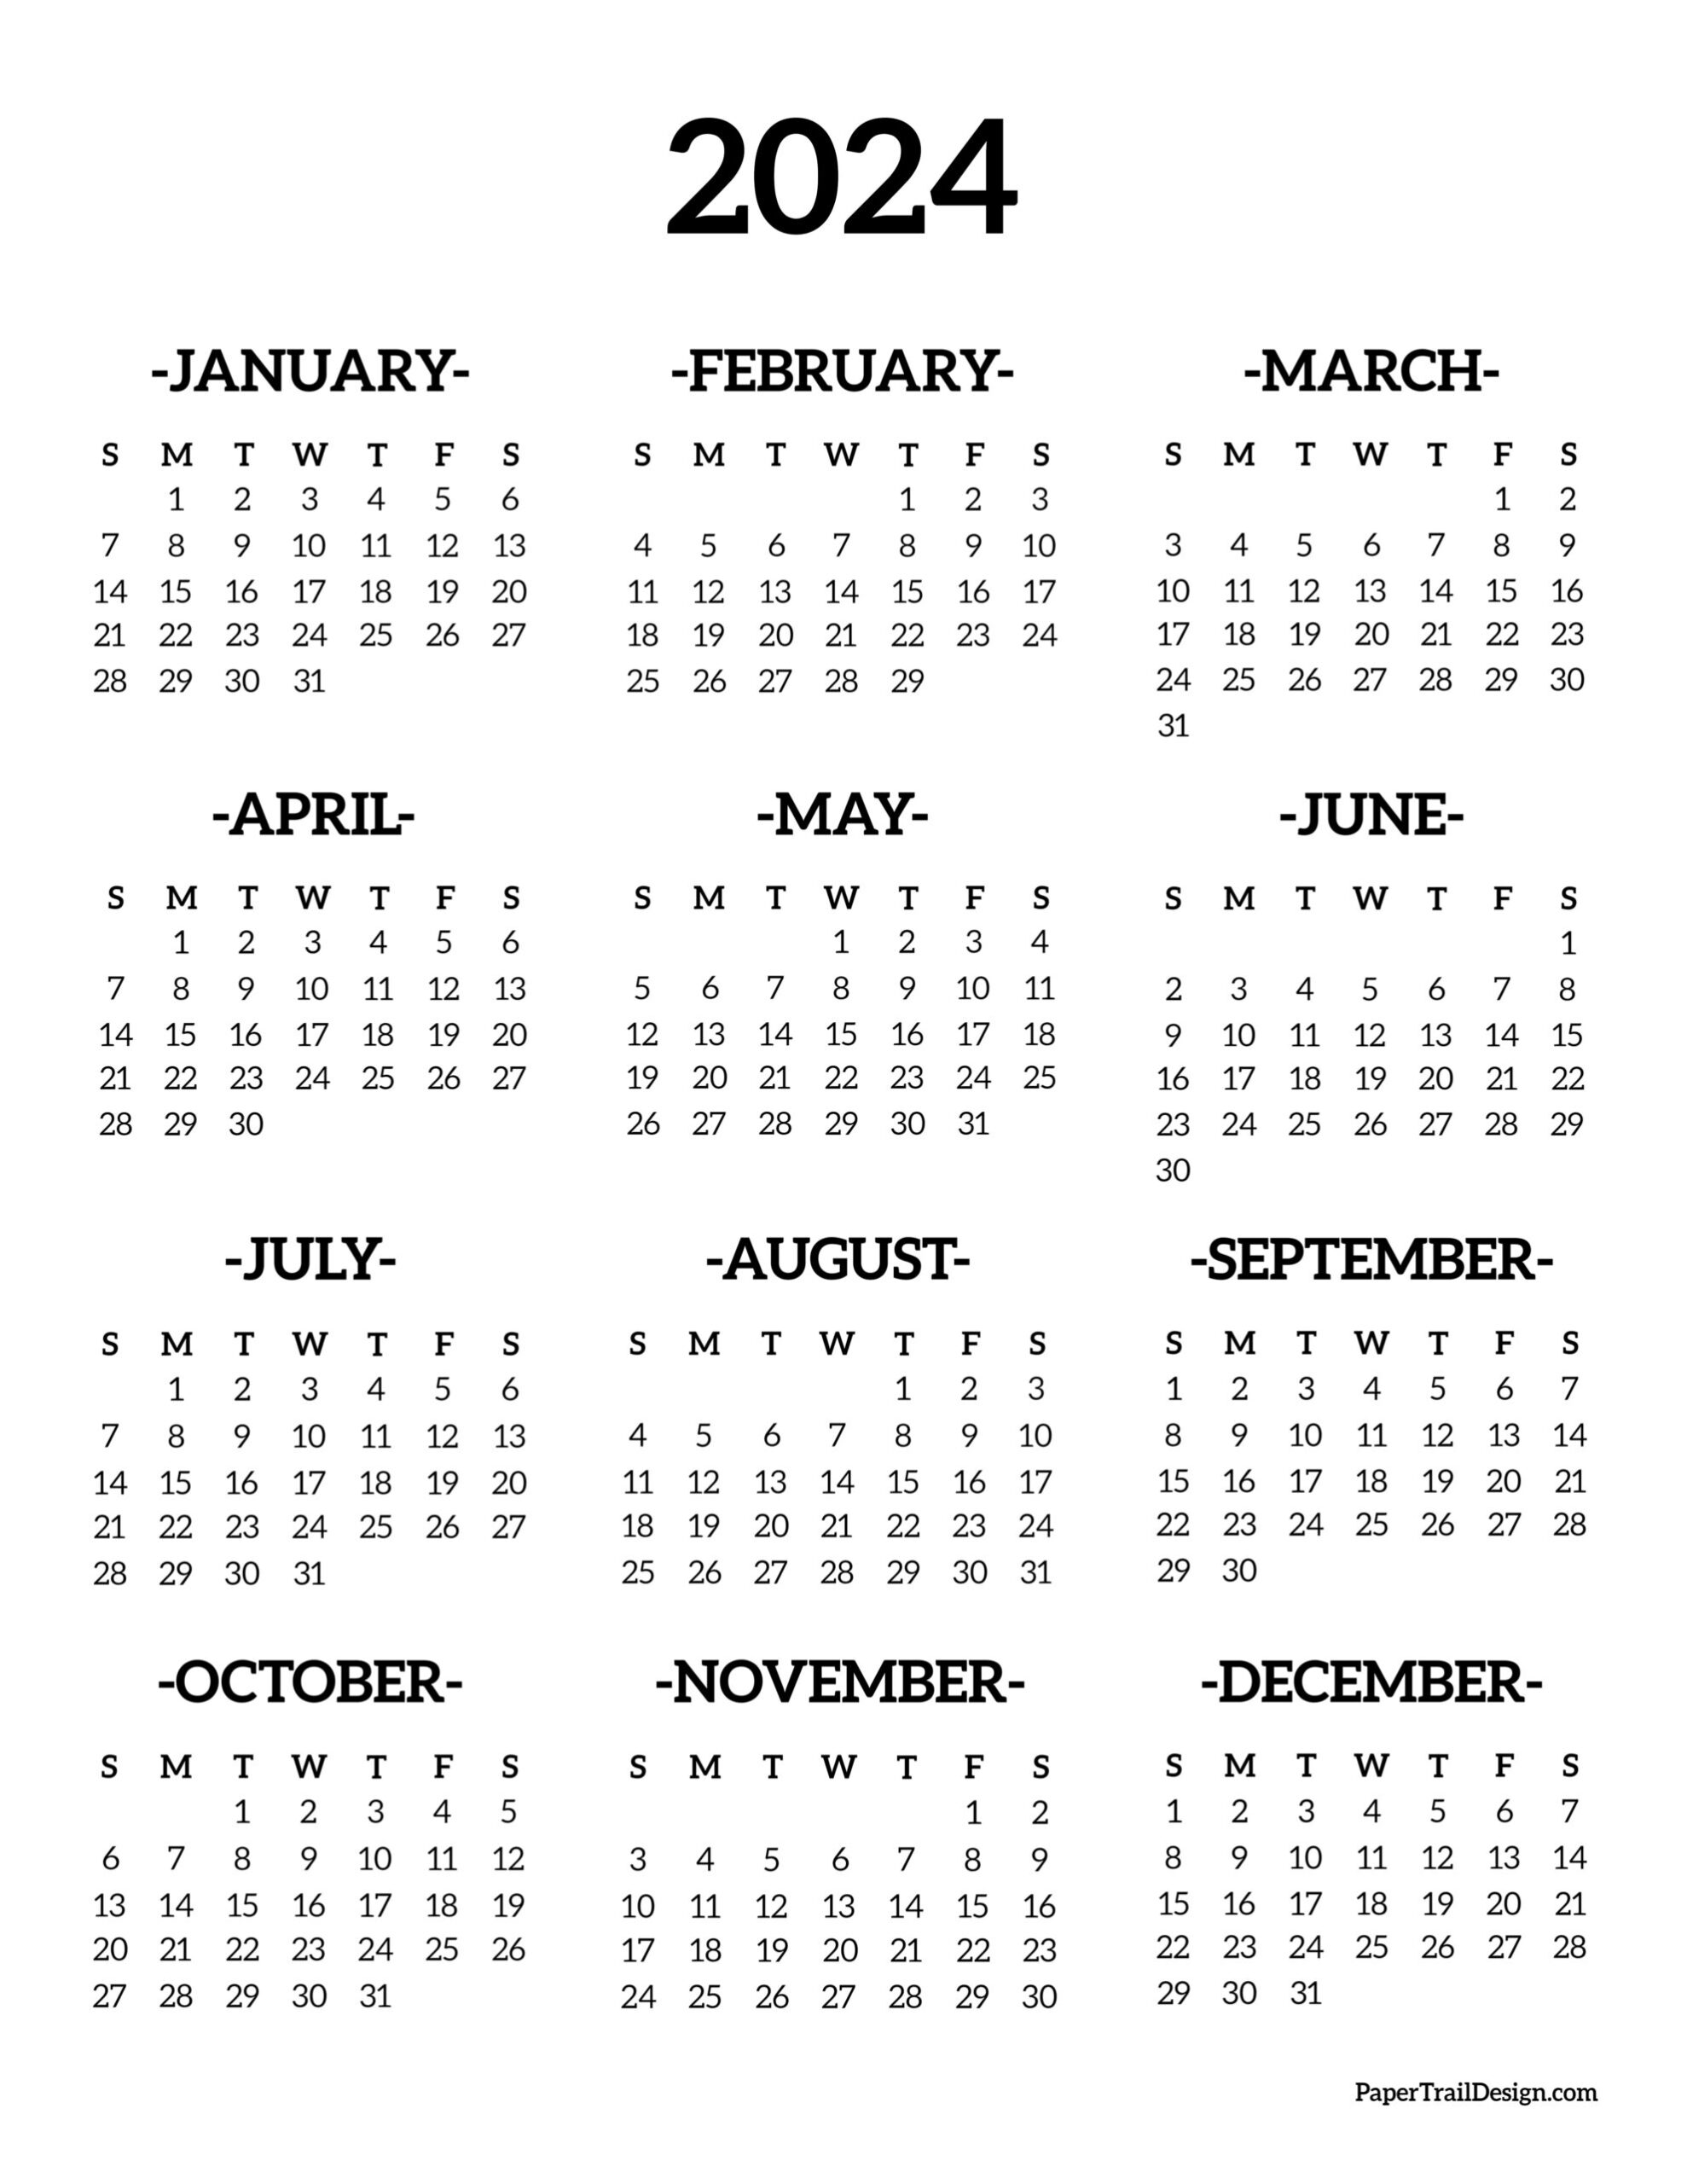 Calendar 2024 Printable One Page - Paper Trail Design for Free Printable Year At A Glance Calendar 2024